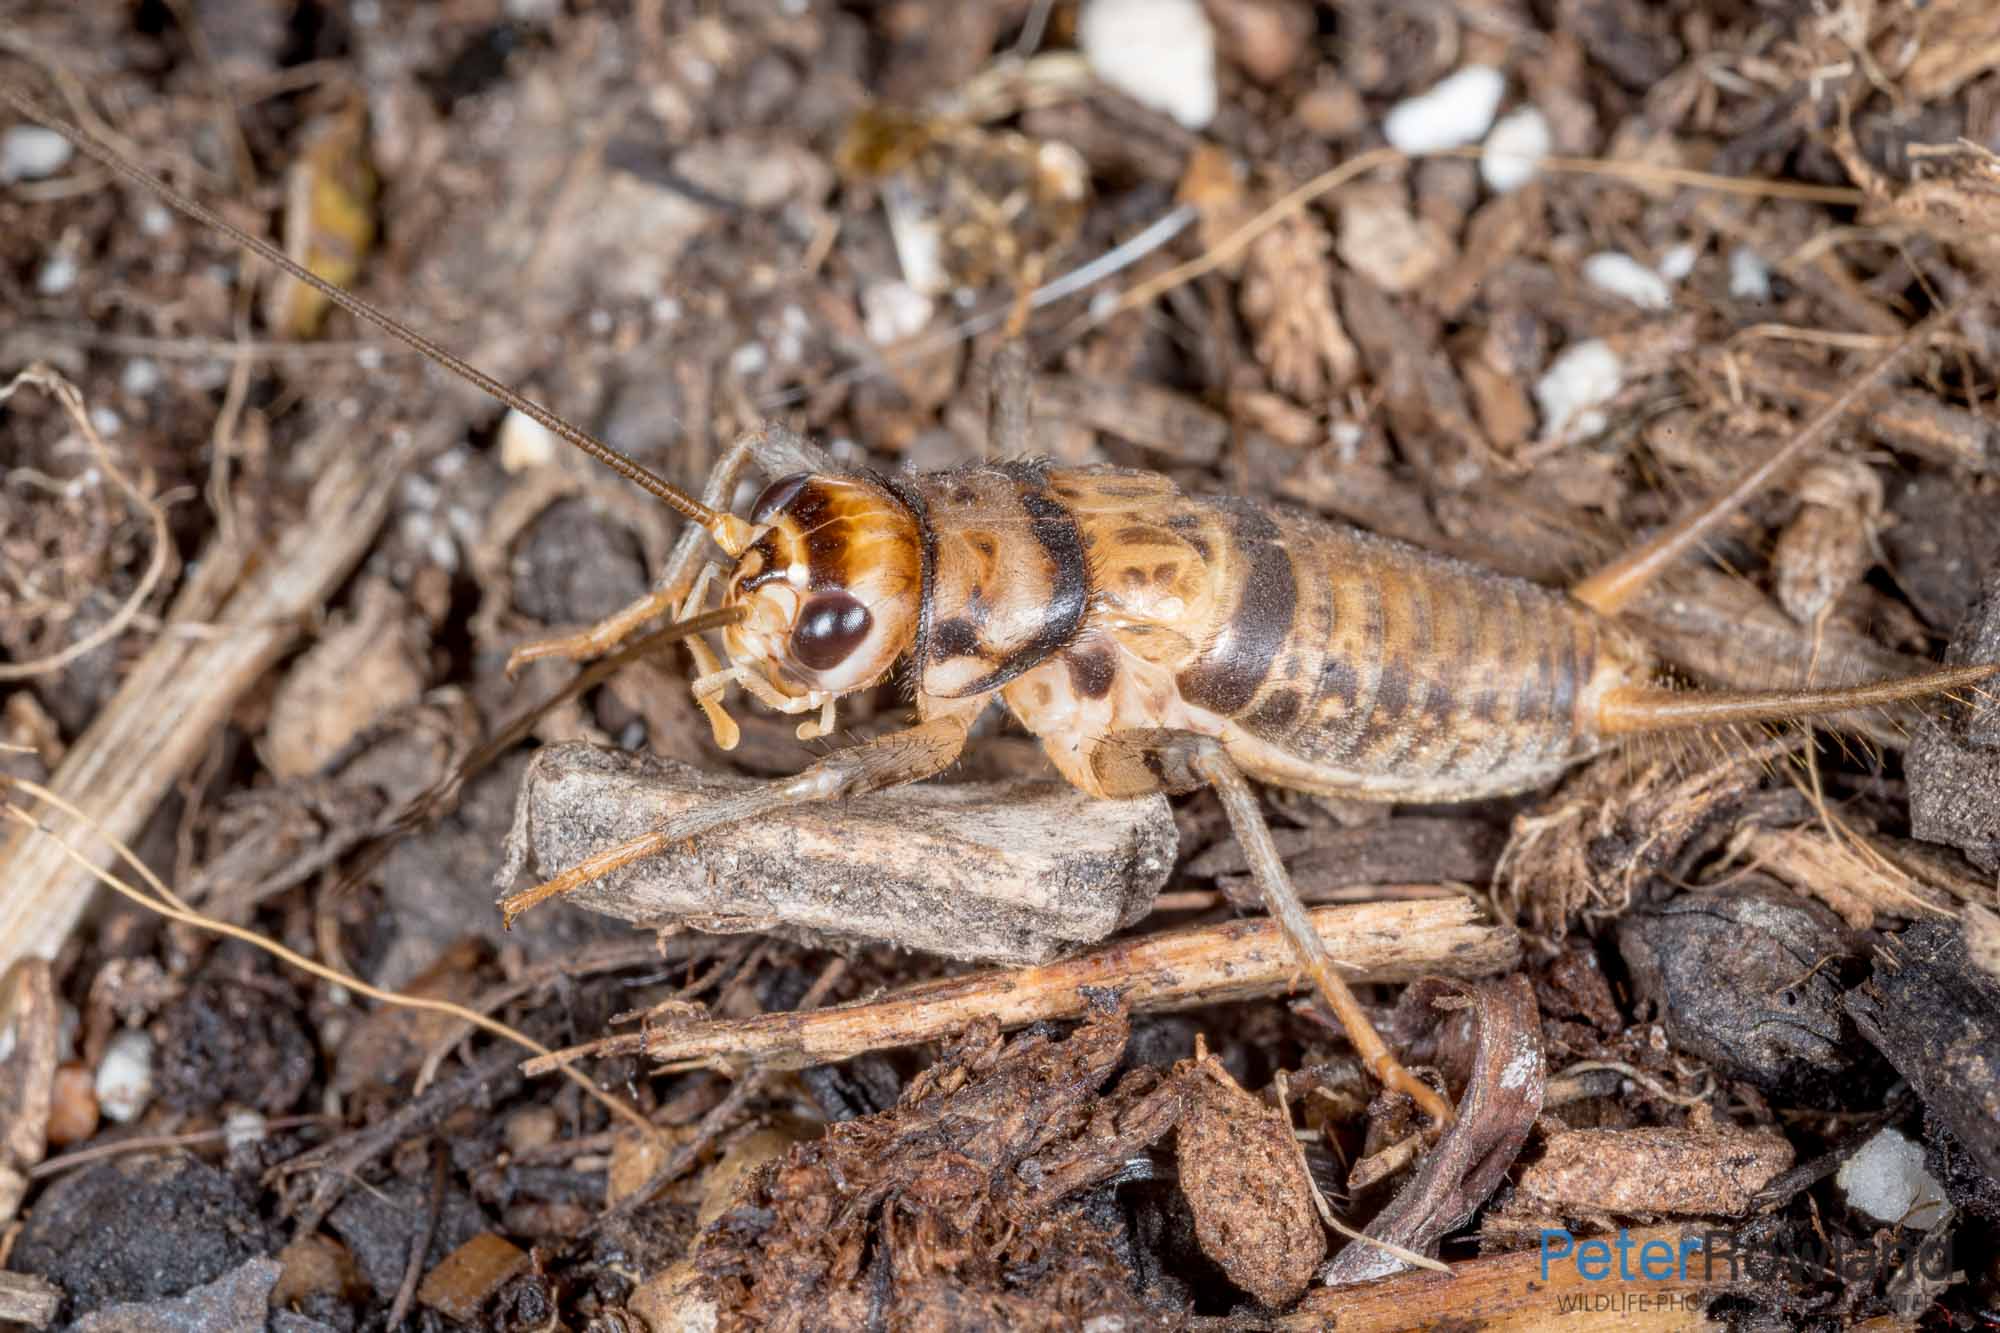 A Tropical House Cricket crawling on debris in the garden